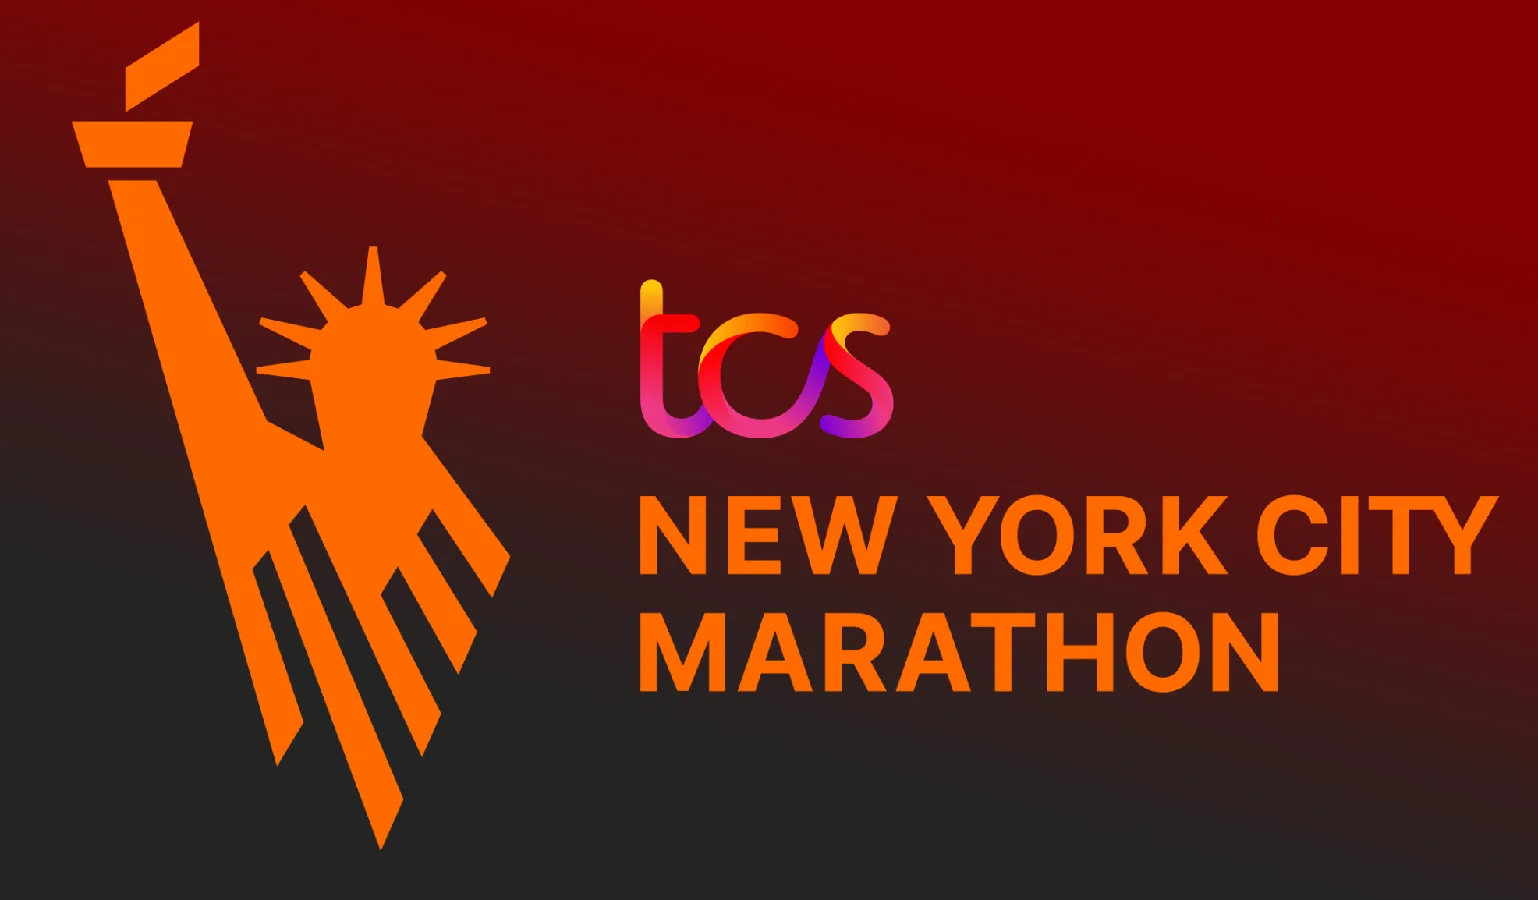 TCS New York City Marathon live streaming and results